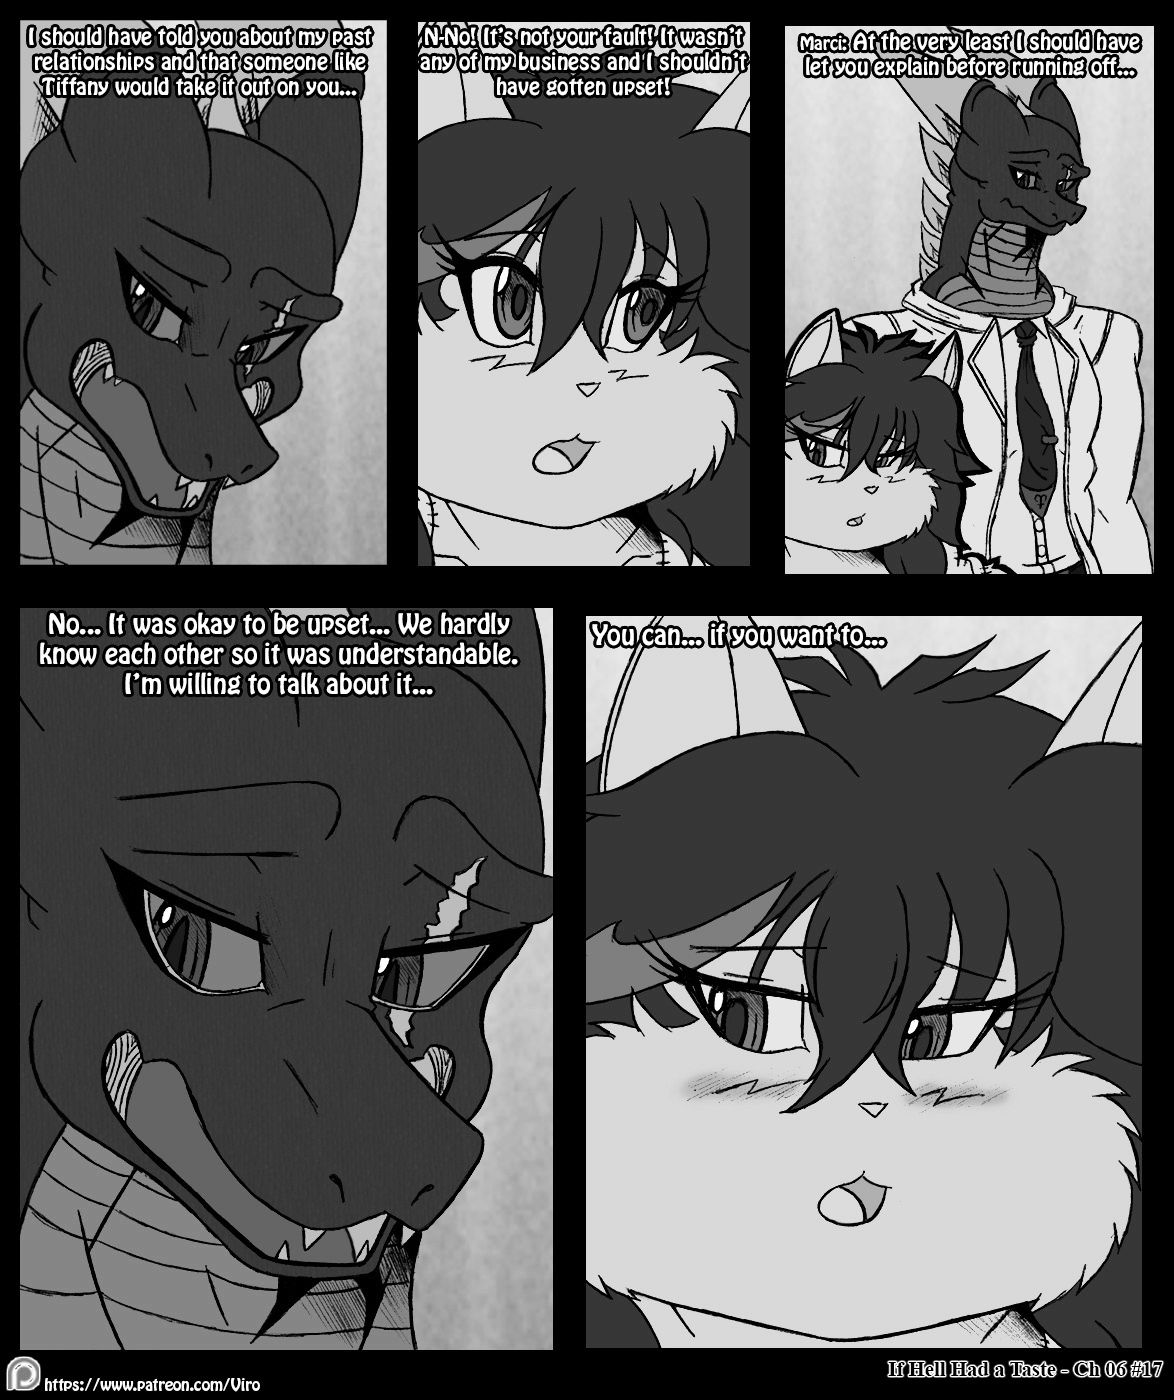 [Viro] If Hell Had a Taste Chapter 6 [Ongoing] 18